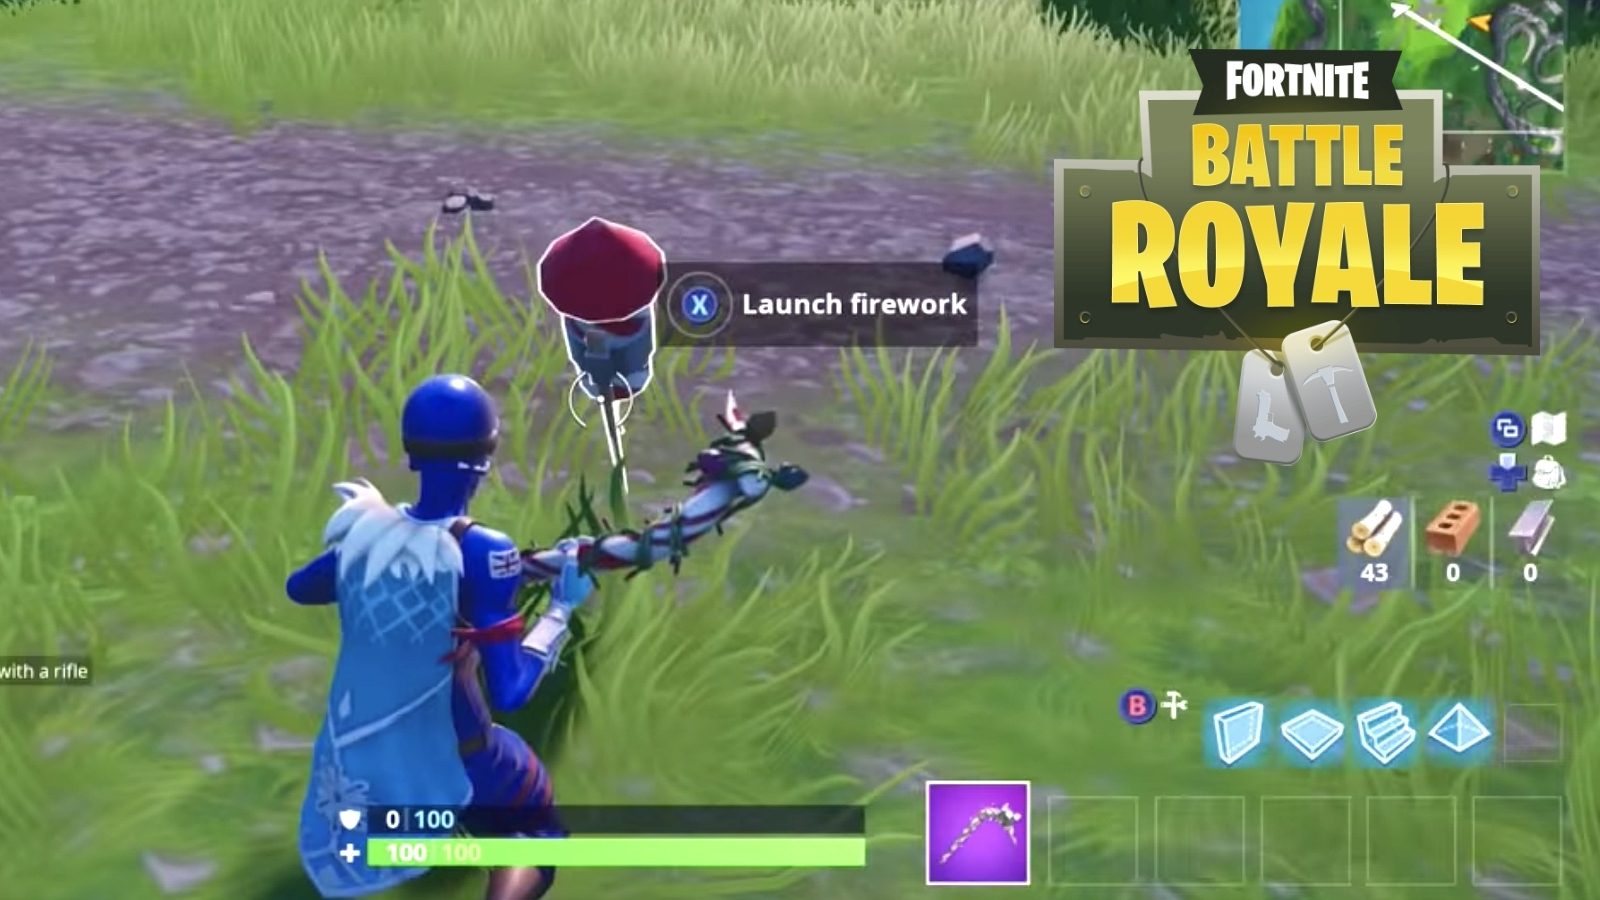 Fortnite Firework Locations Where To Launch Fireworks